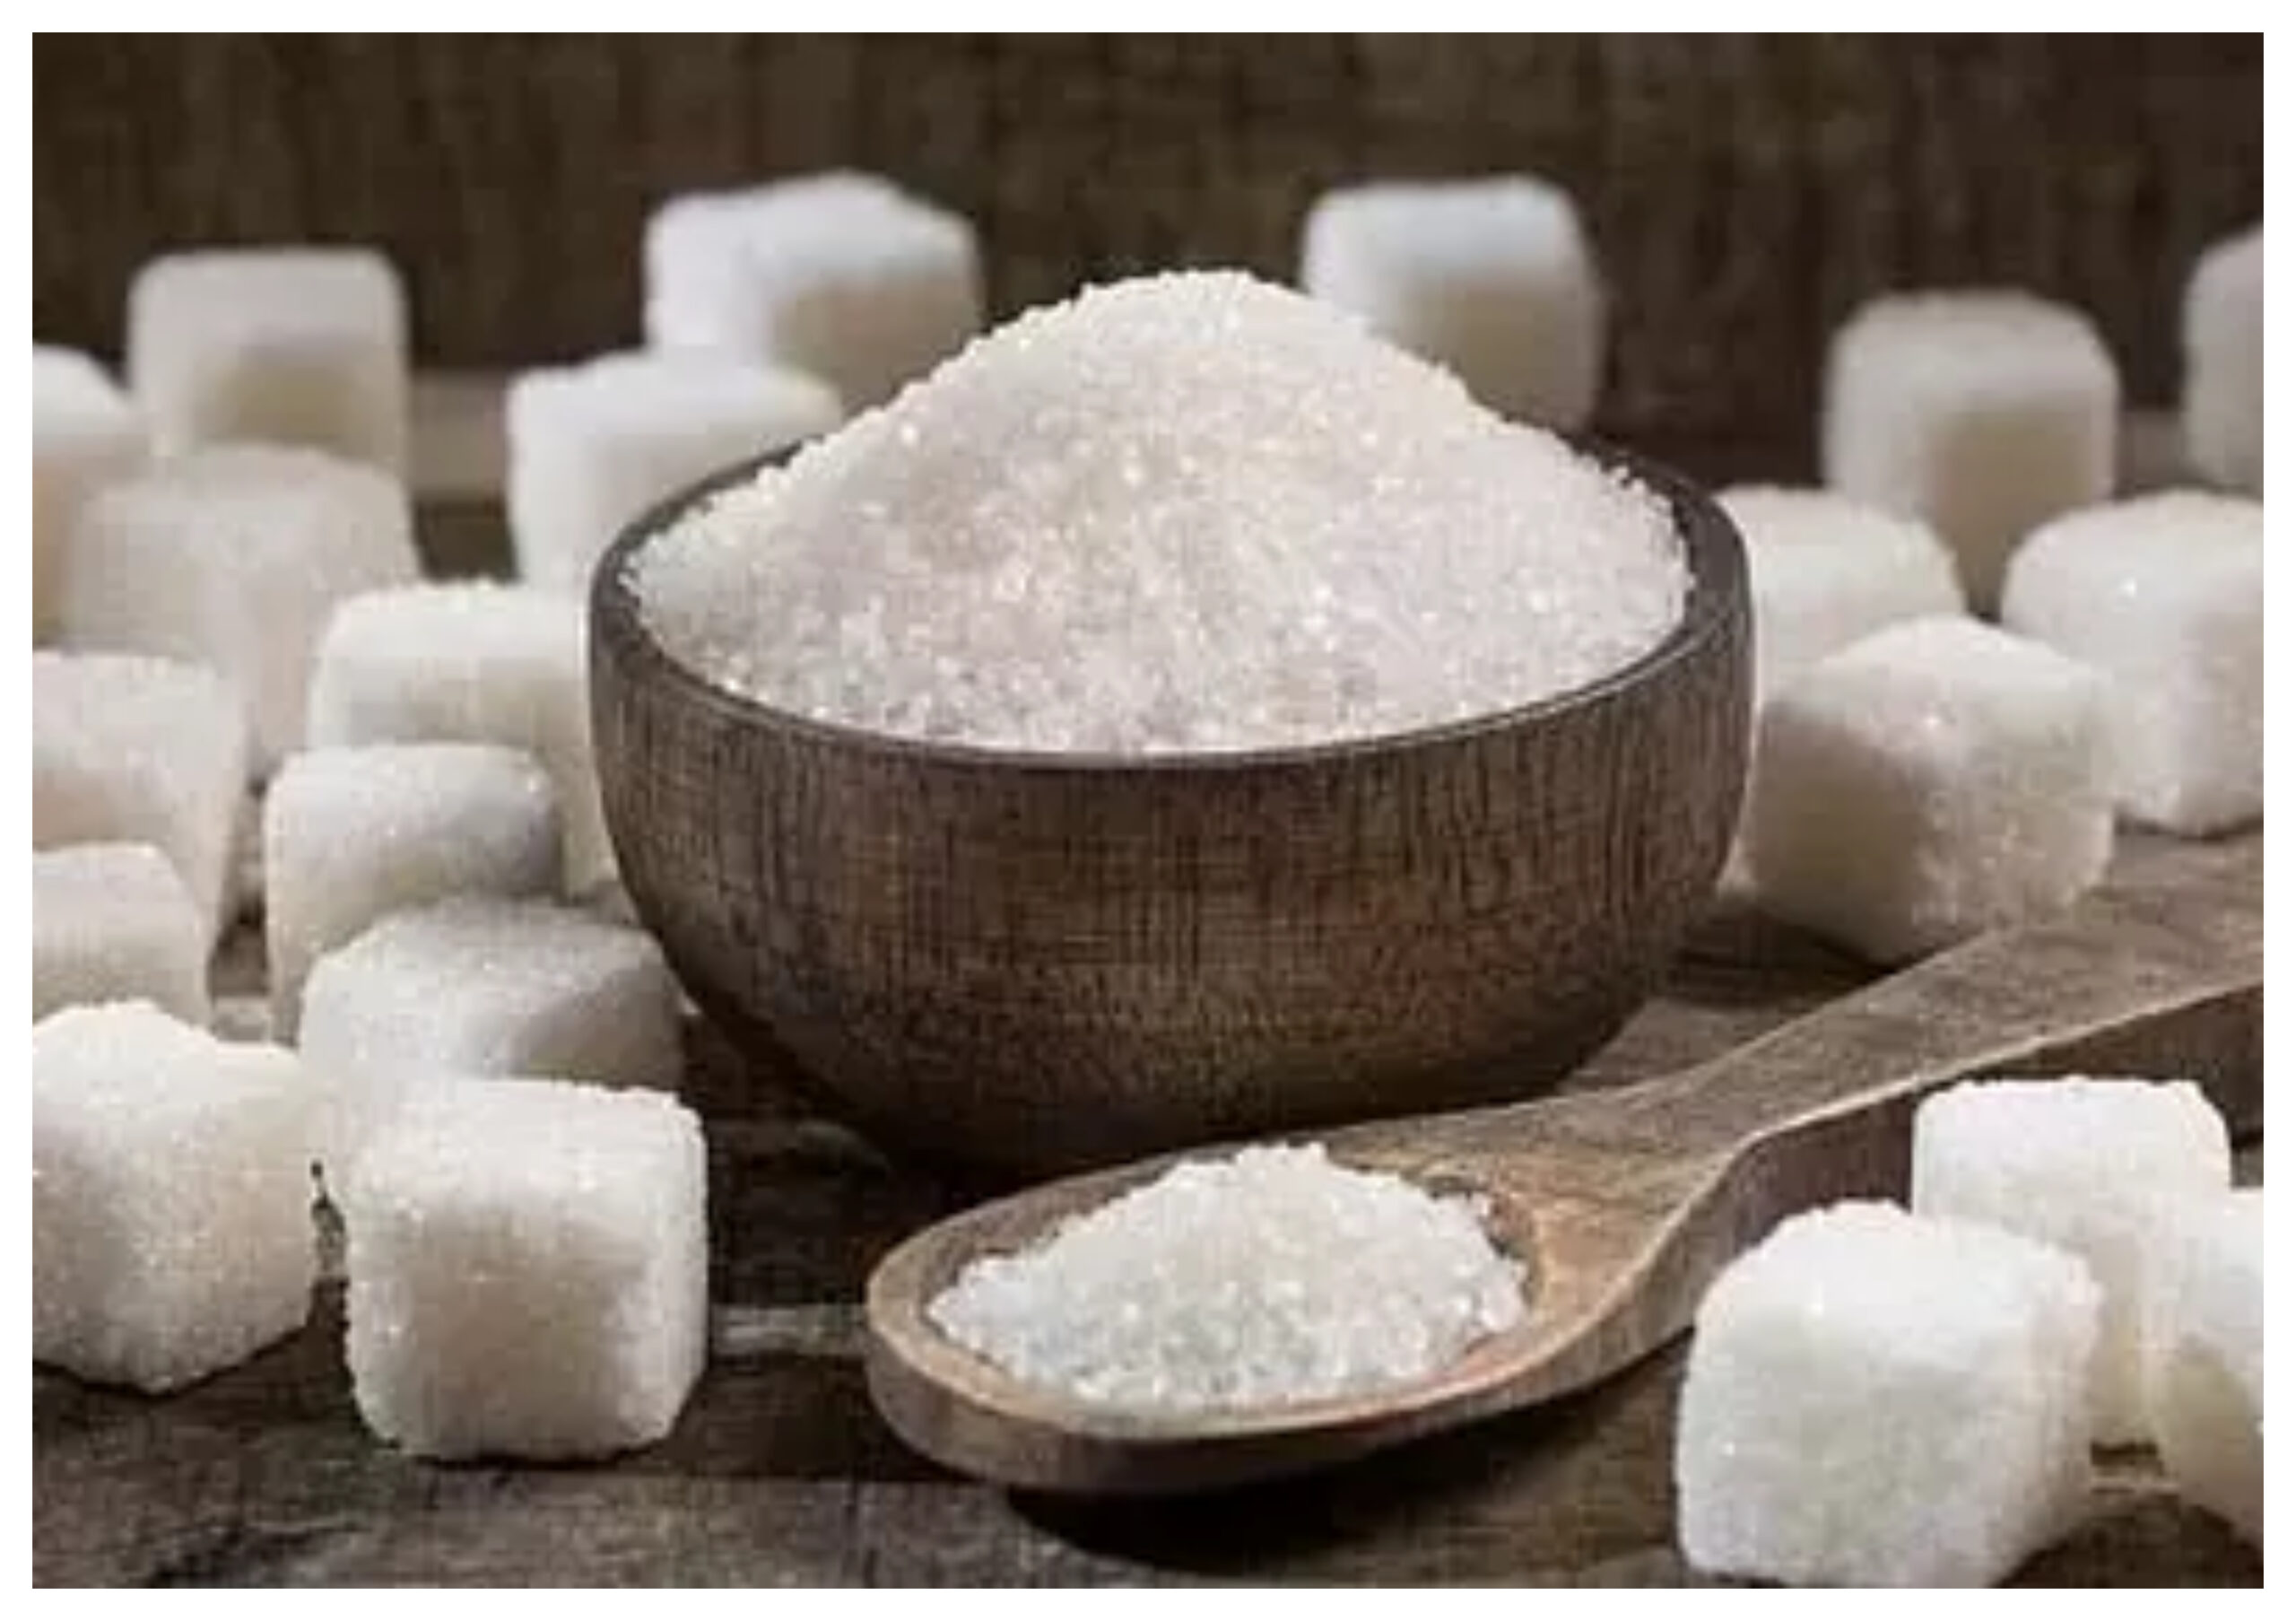 Sugar Intake: How much sugar should you eat and why does your sugar level increase?